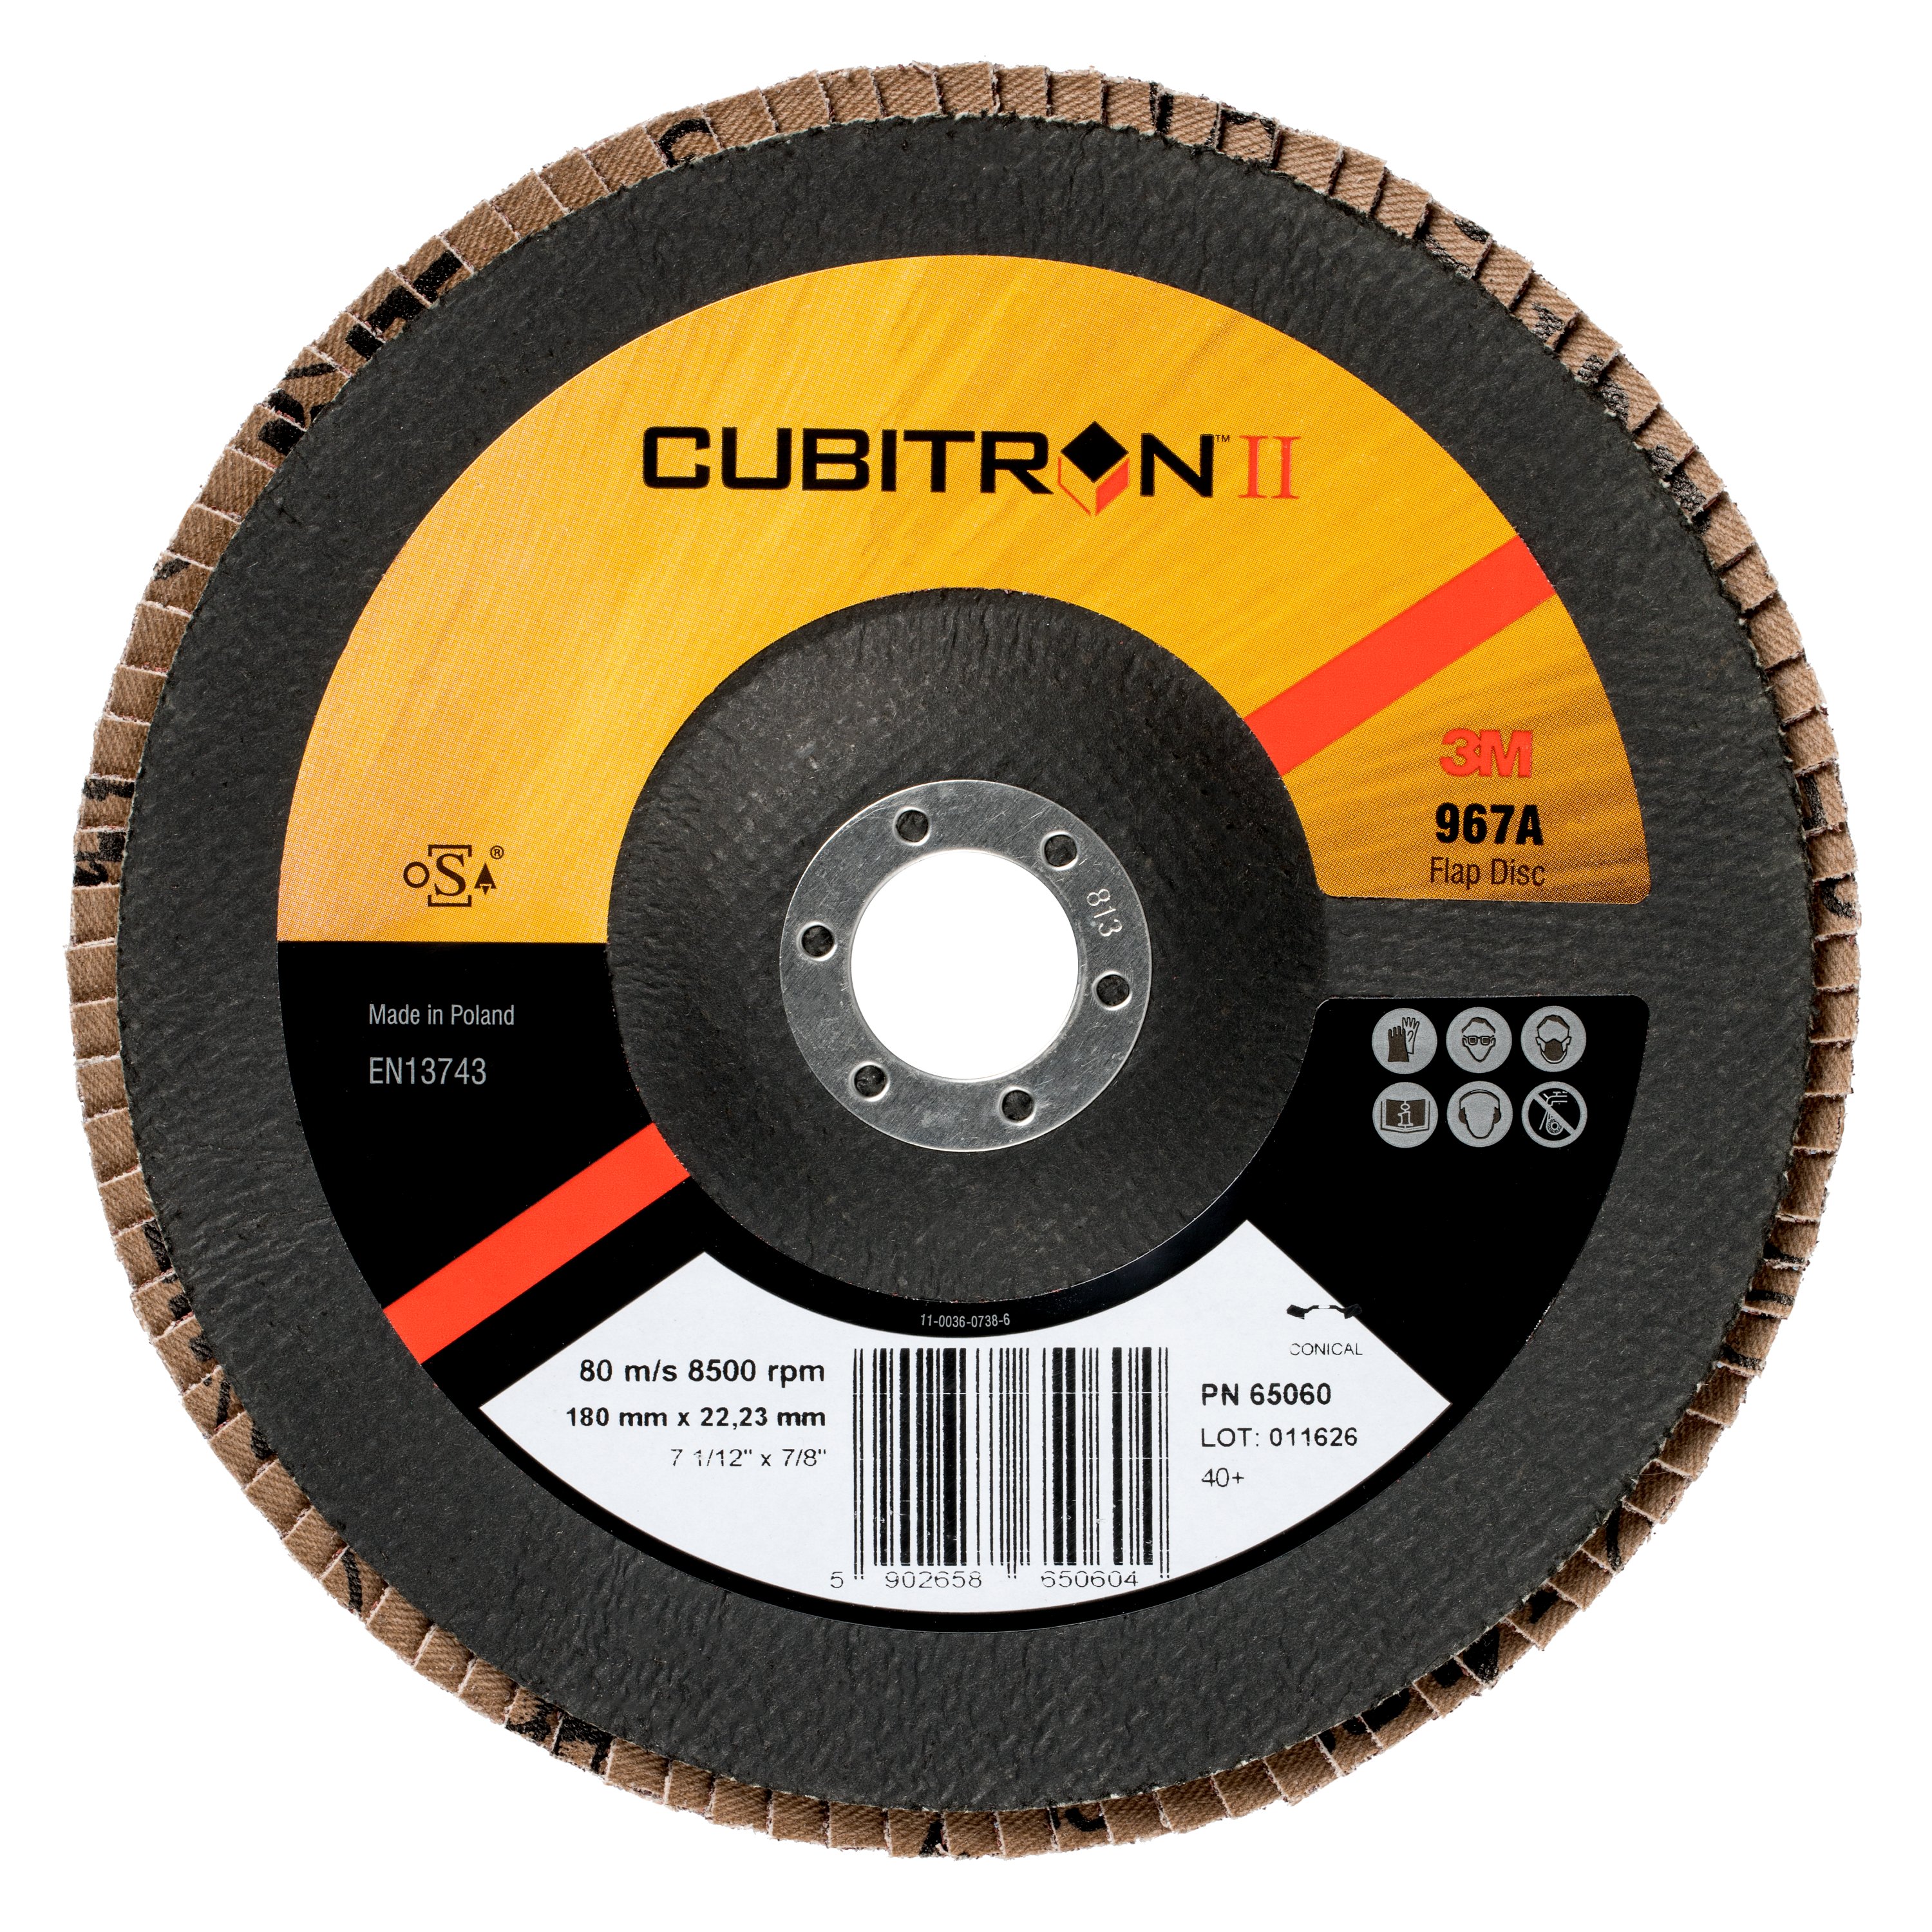 3M Cubitron II Flap Disc 967A Y-Weight 40+ Manufacturer Grade T29 5 x 7//8 Pack of 10